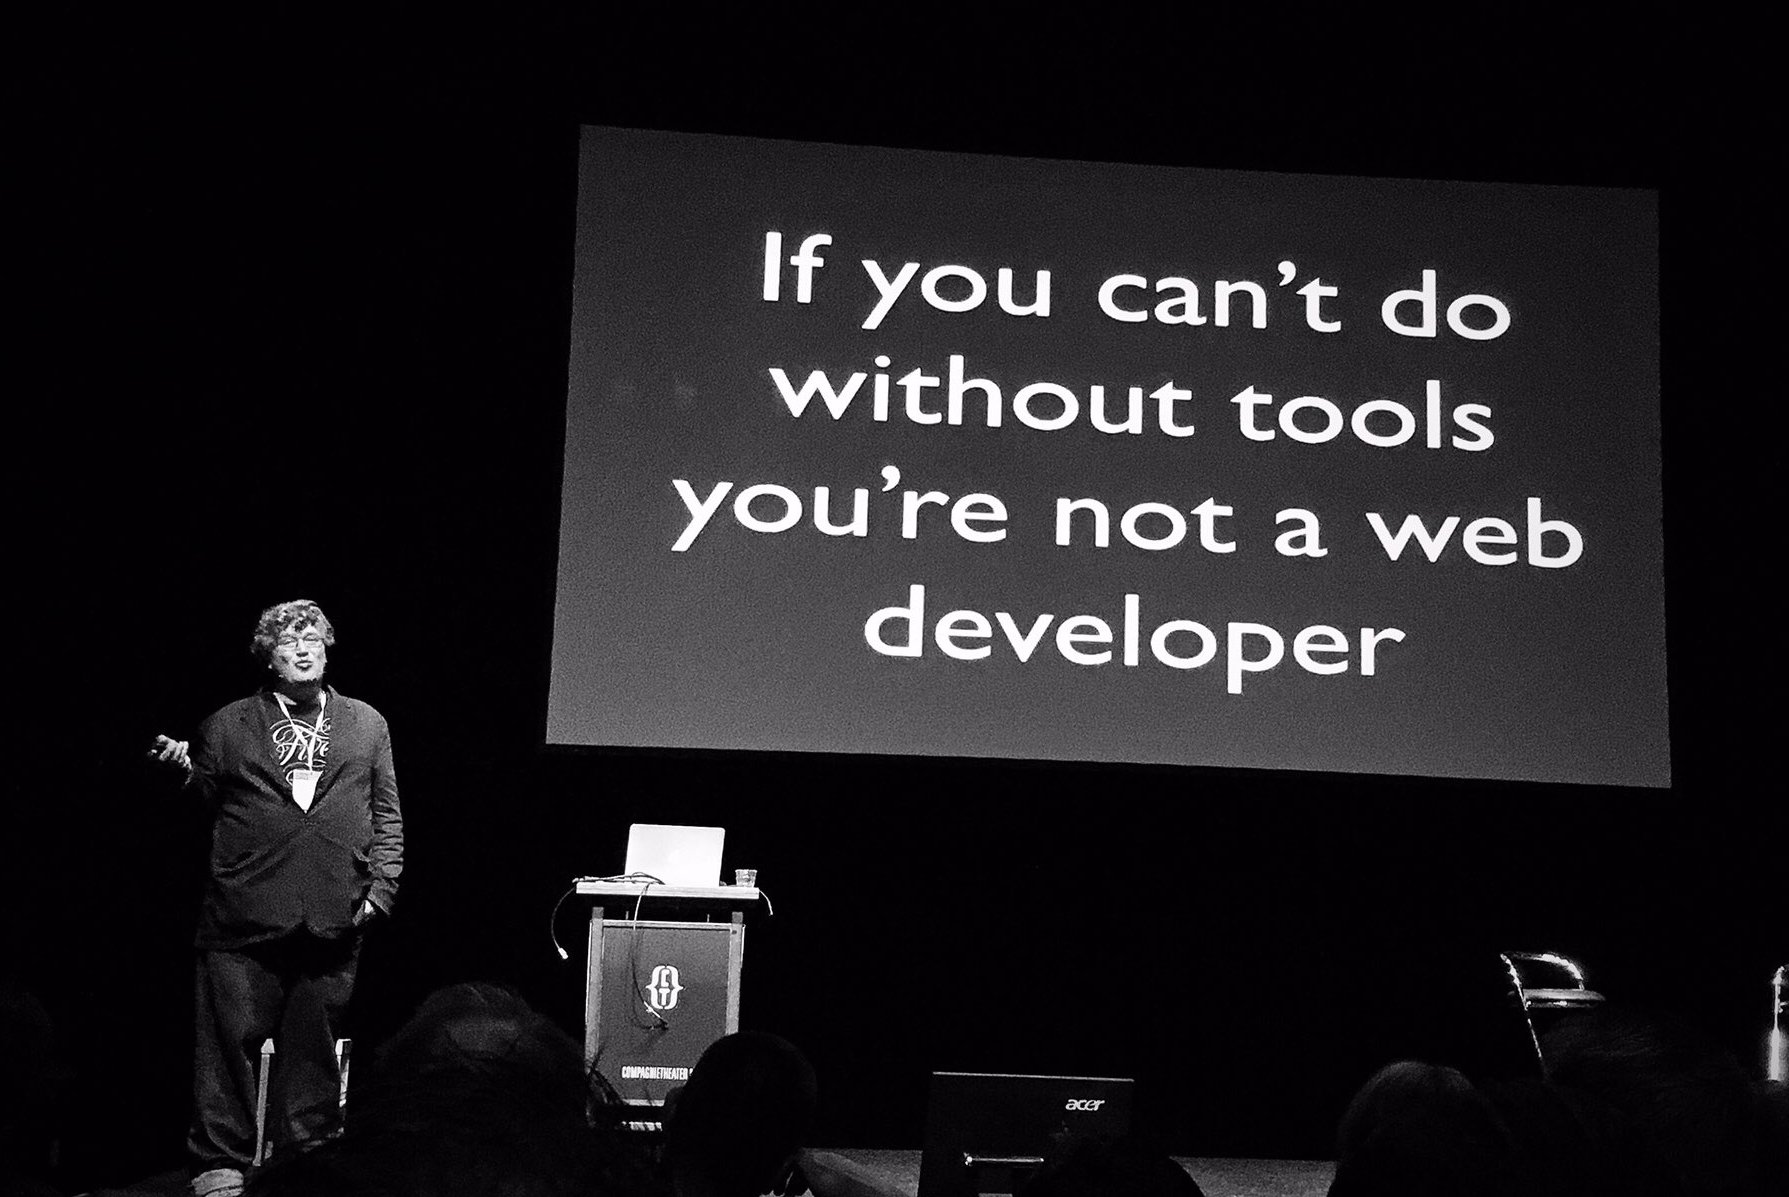 If you can’t do it without tools, you’re not a web developer